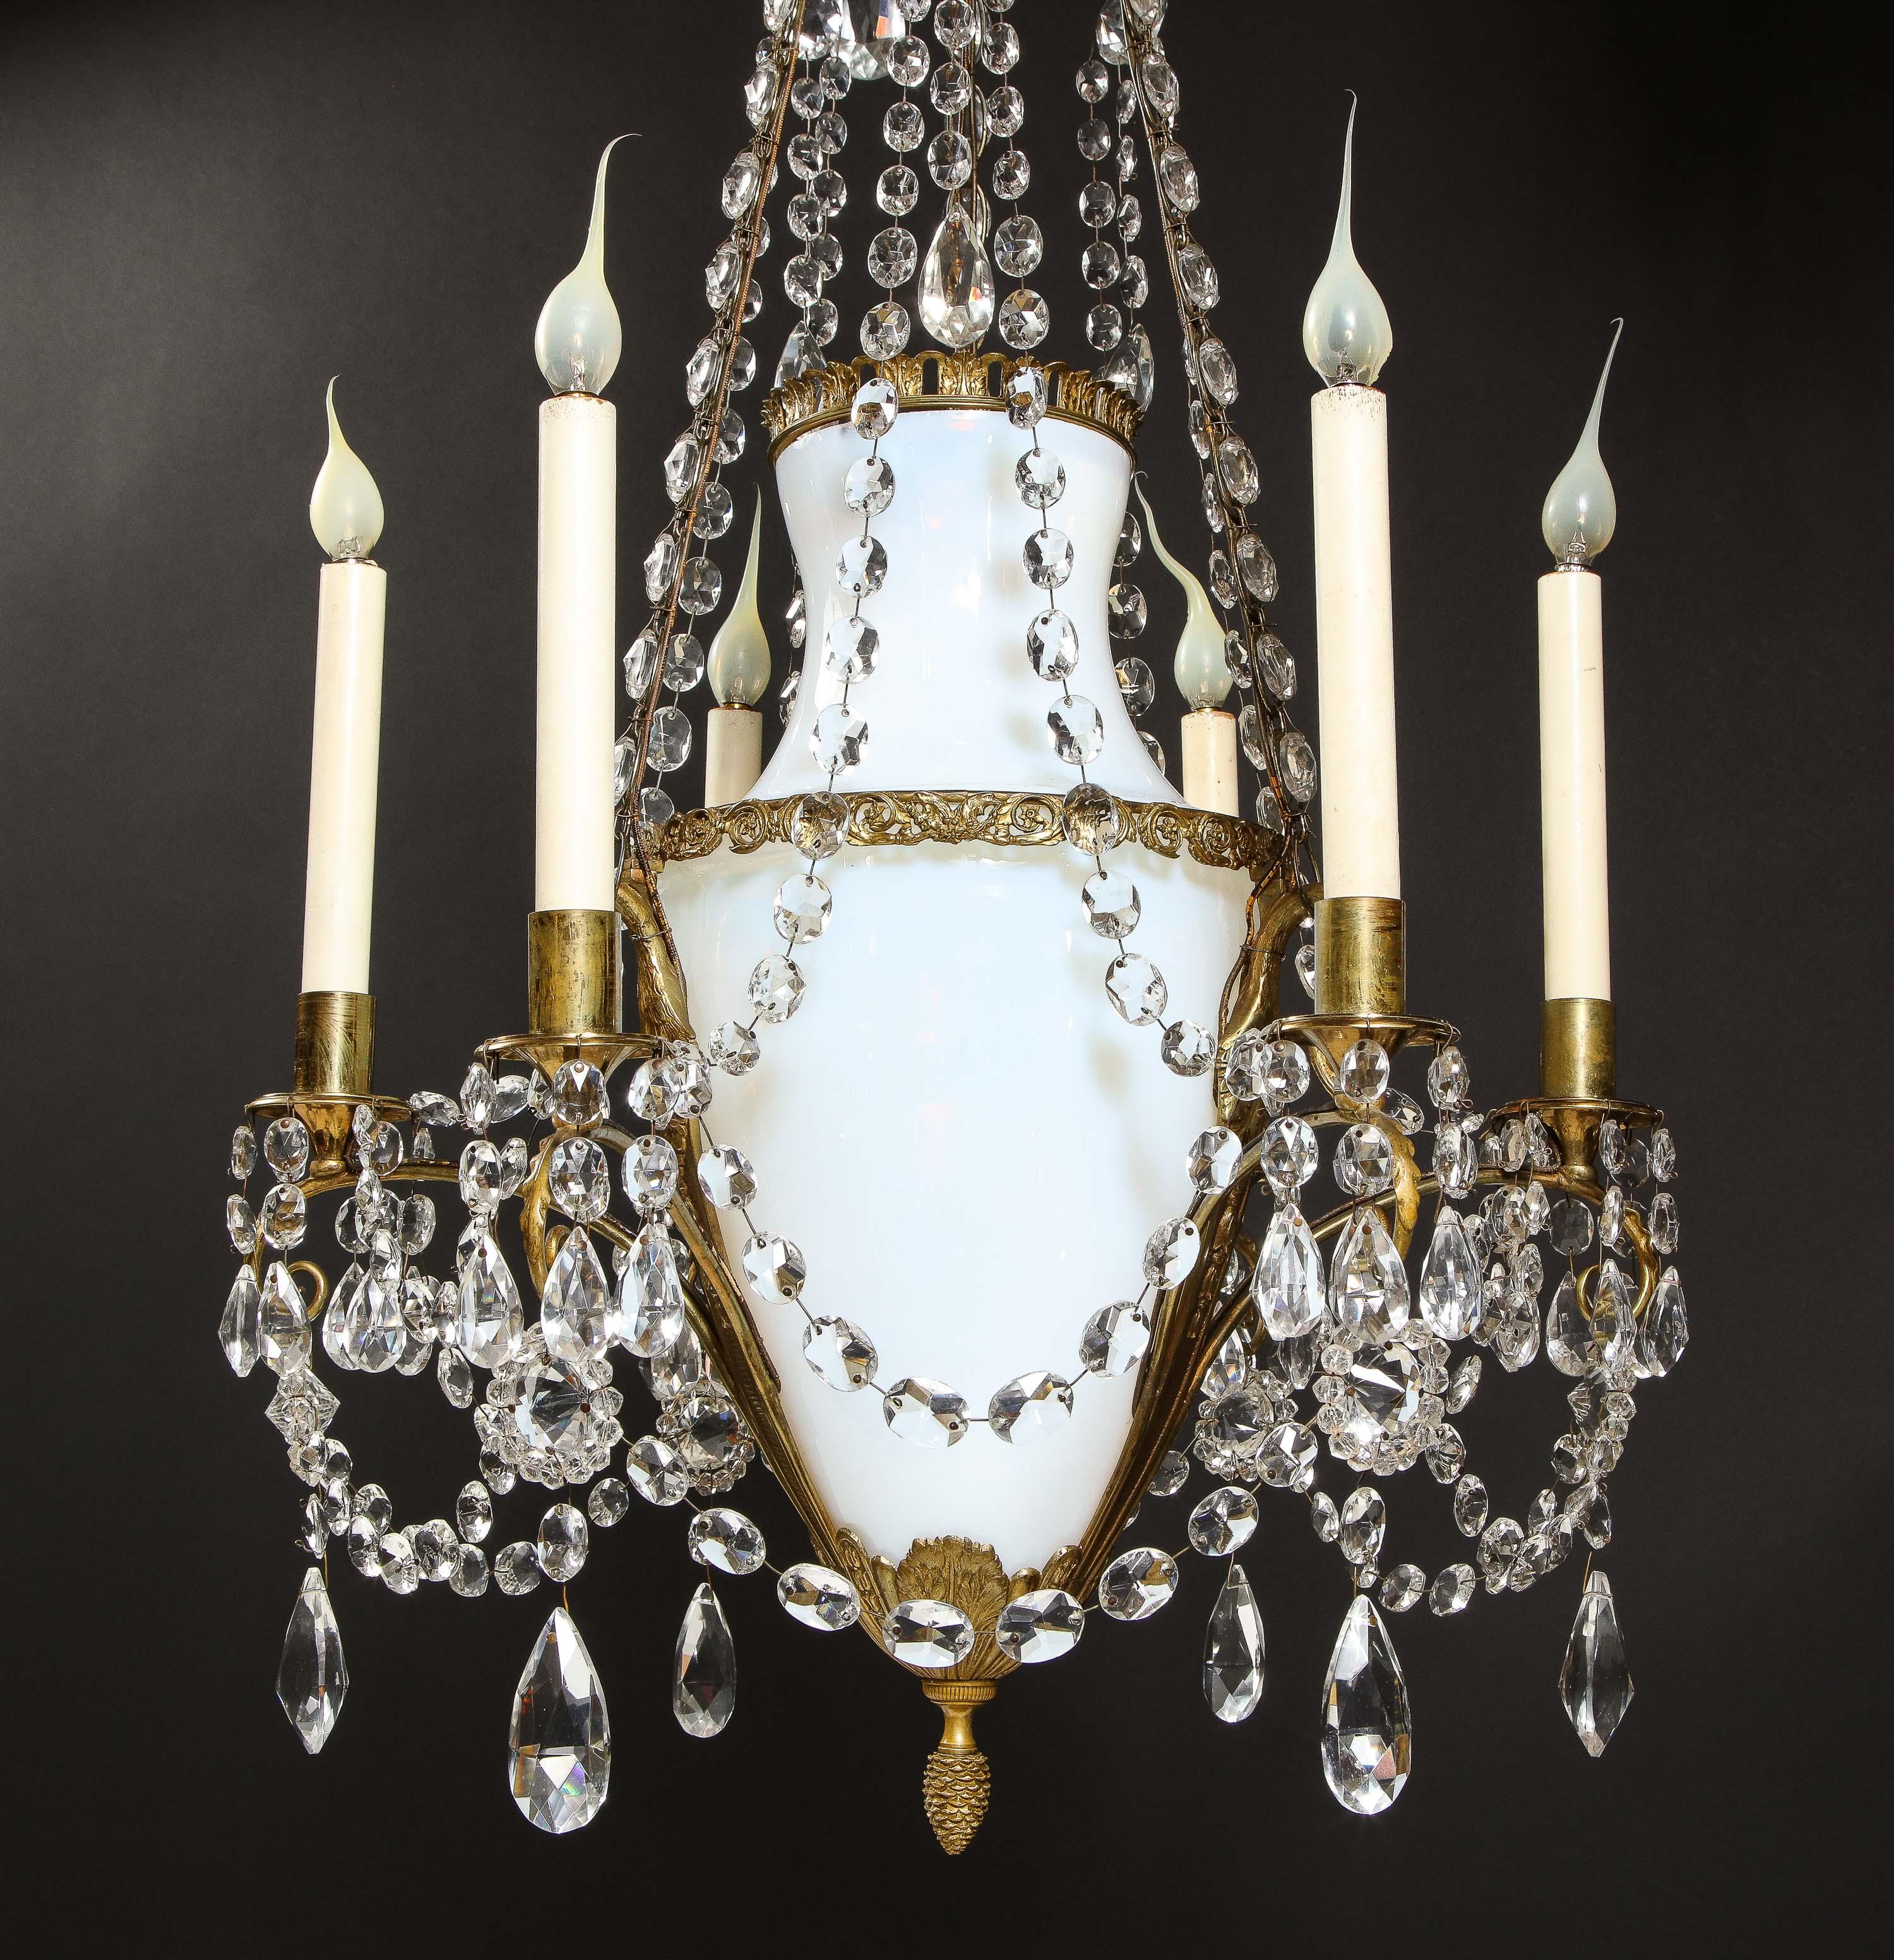 A Fine Antique Russian Neoclassical gilt bronze, white opaline glass and crystal multi light chandelier of superb quality and detail. This unique neoclassical chandelier is embellished with gilt bronze swans, further decorated with a large white